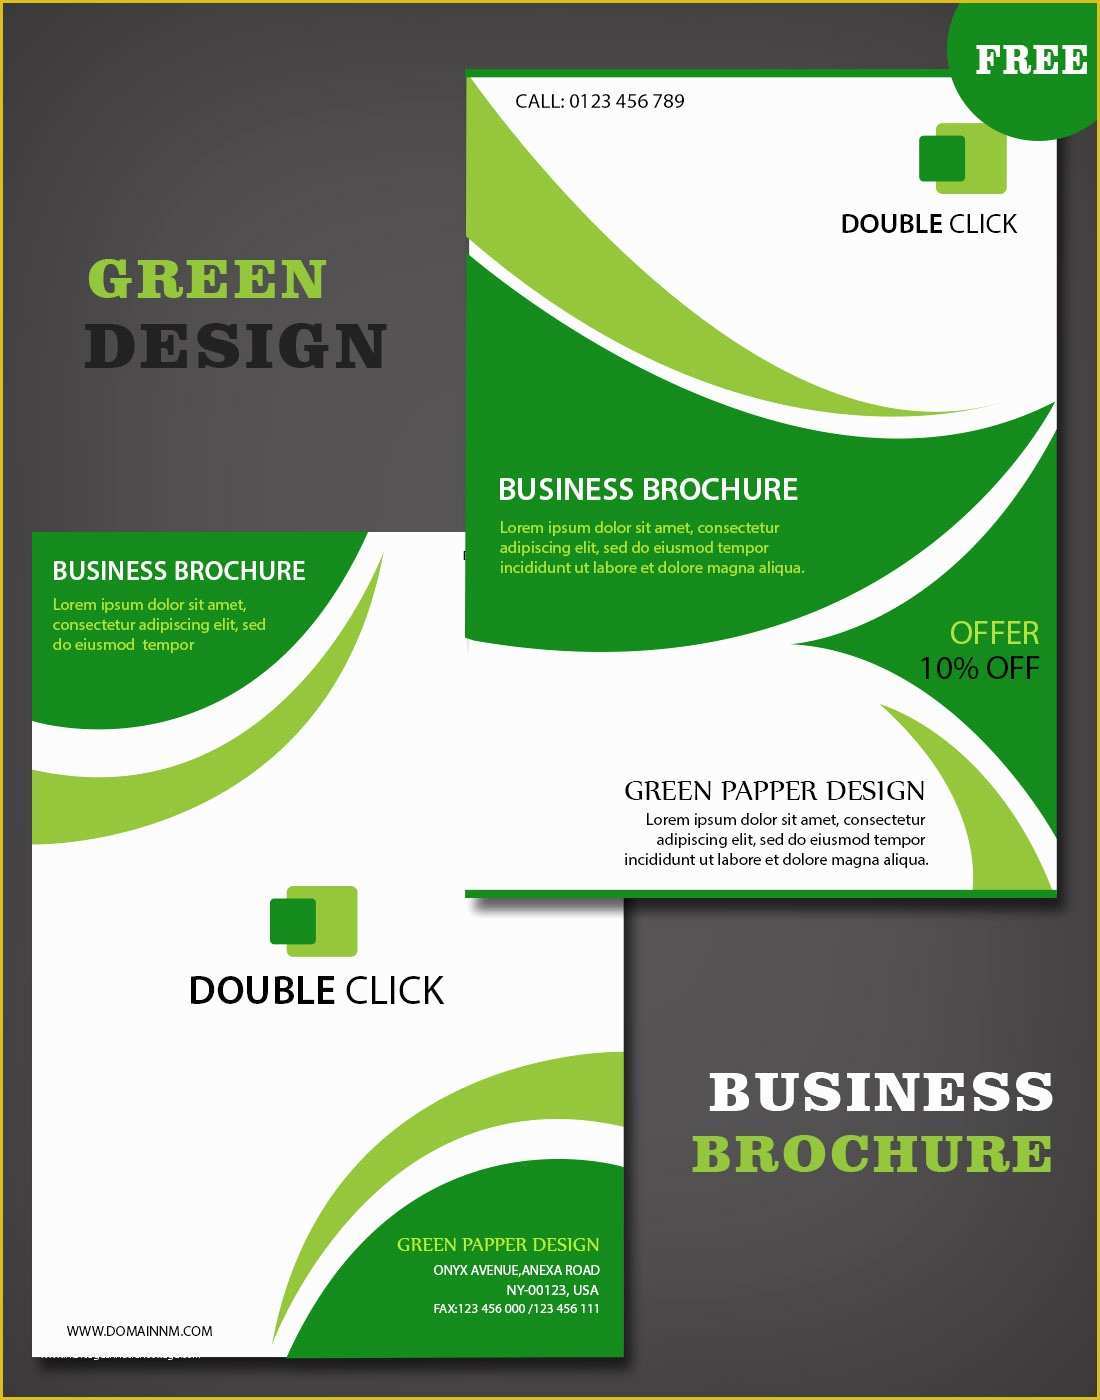 Template for Brochure Design Free Download Of Business Brochure Templates